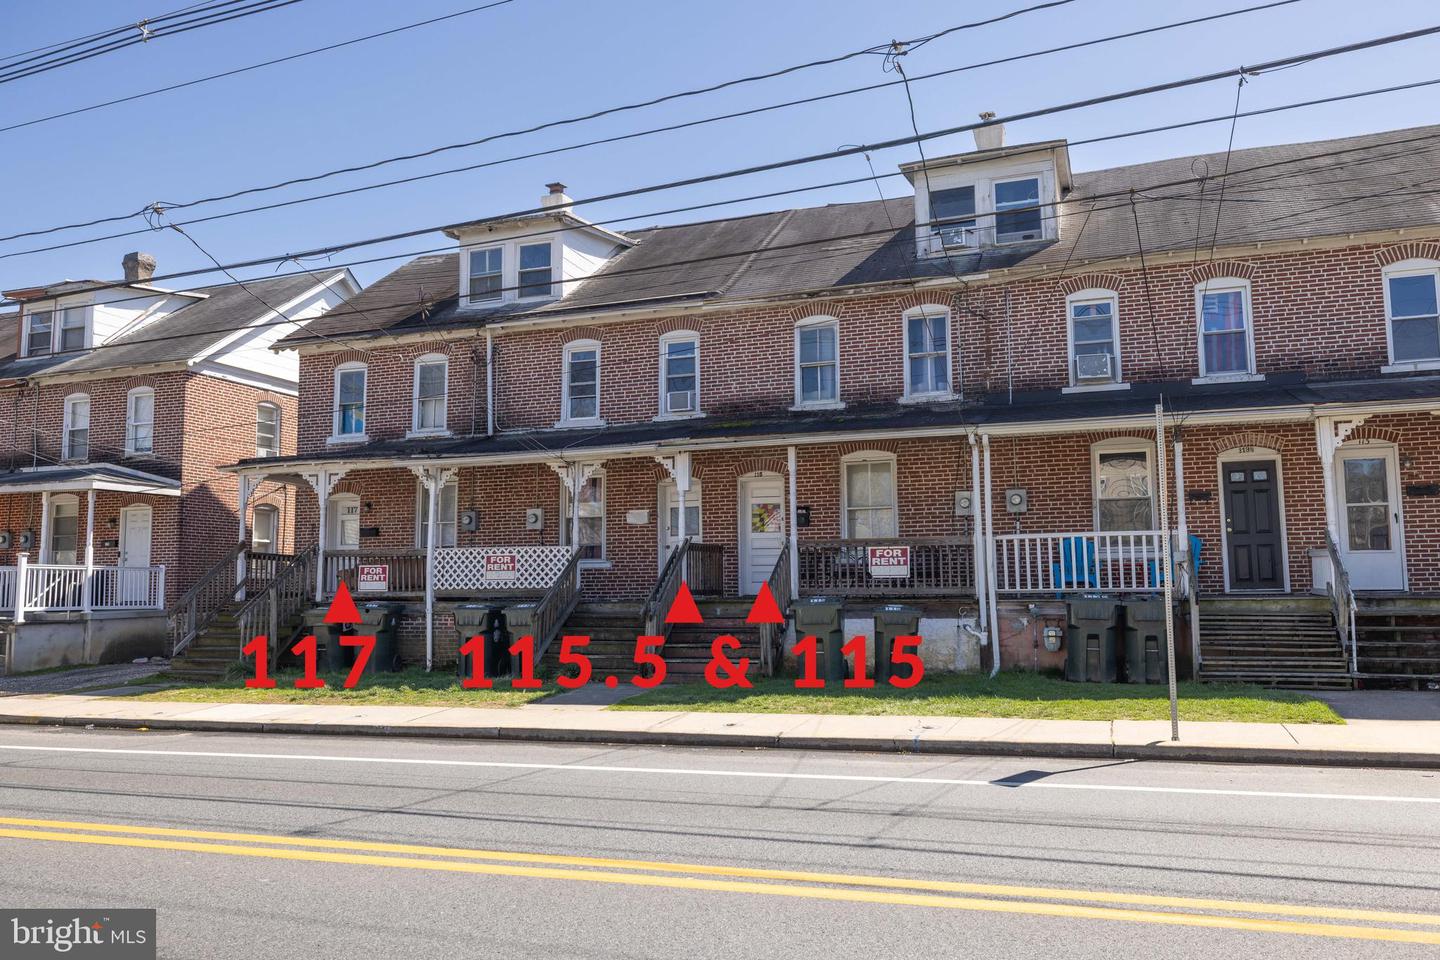 115-1/2 E Cleveland Ave   - Best of Northern Virginia Real Estate